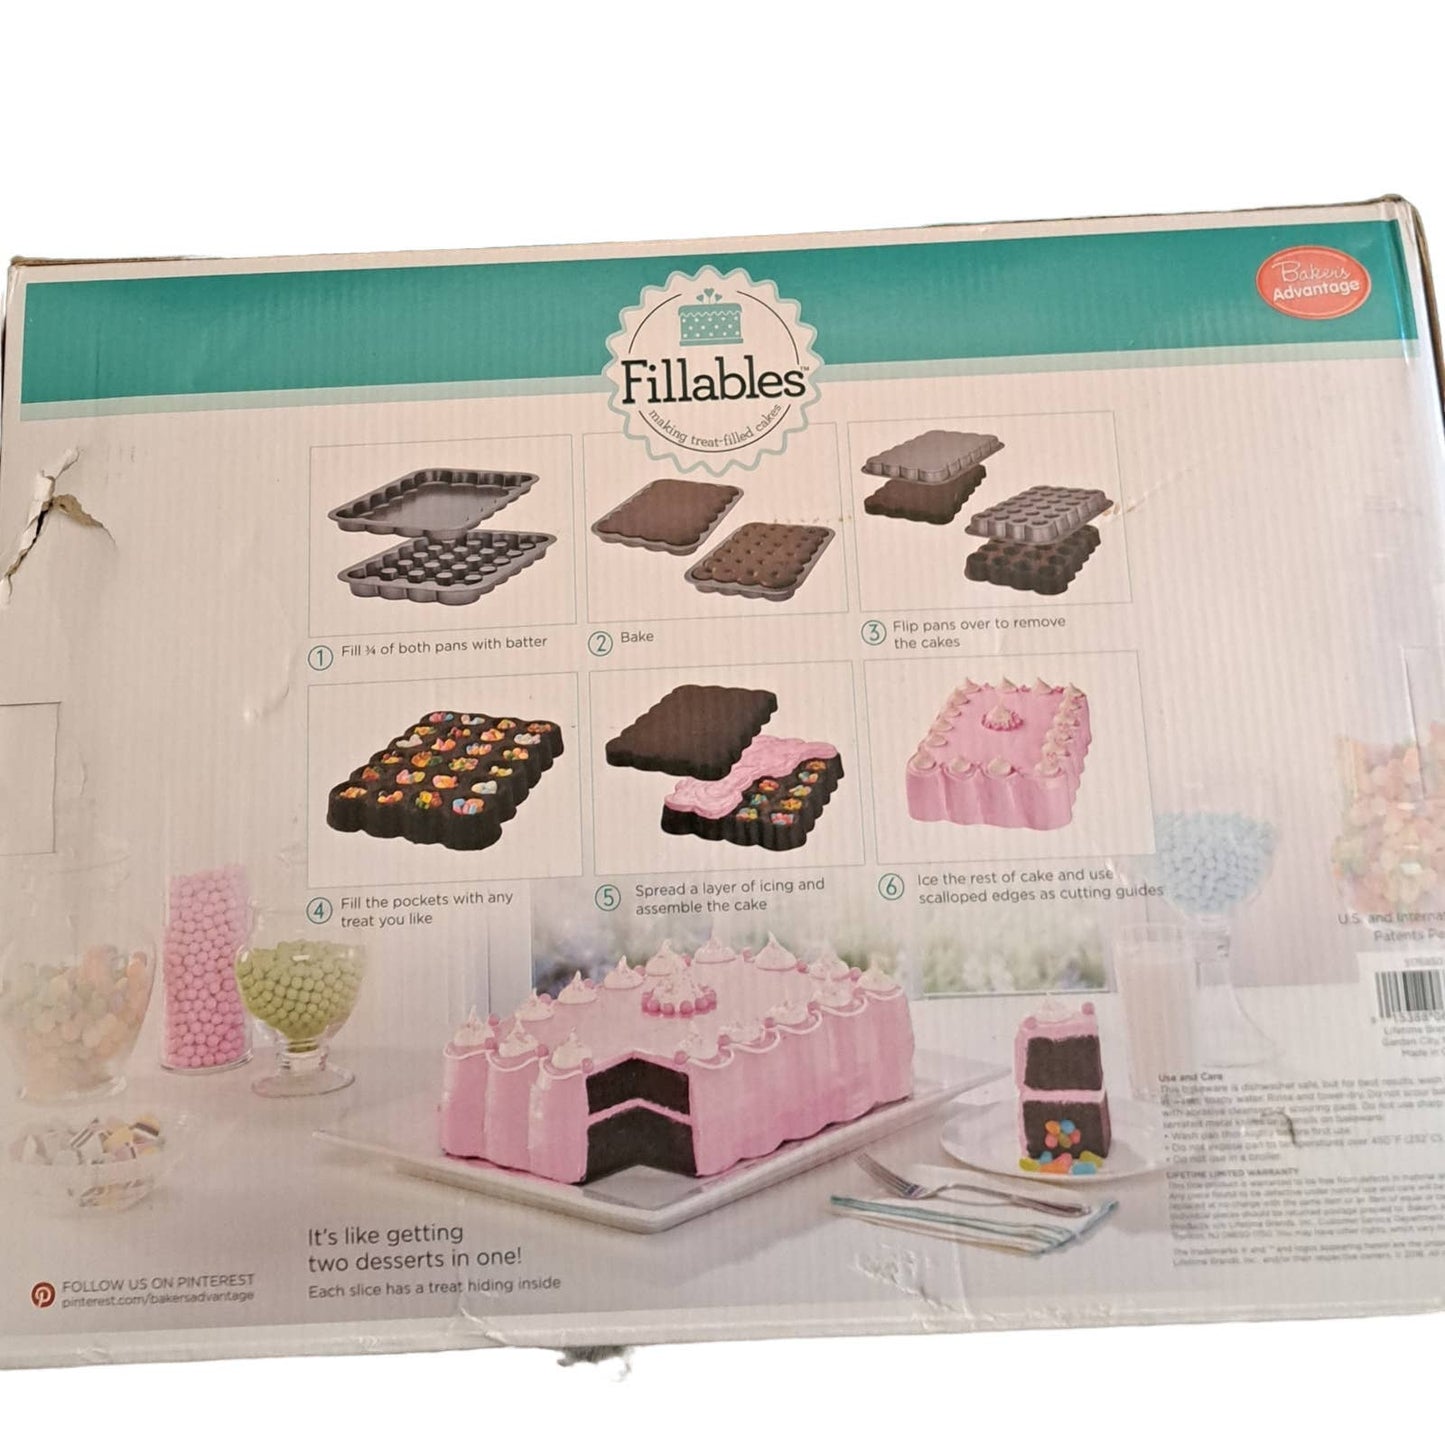 NIB- Bakers Advantage LG FILLABLES 2 pans for treat Filled Cakes